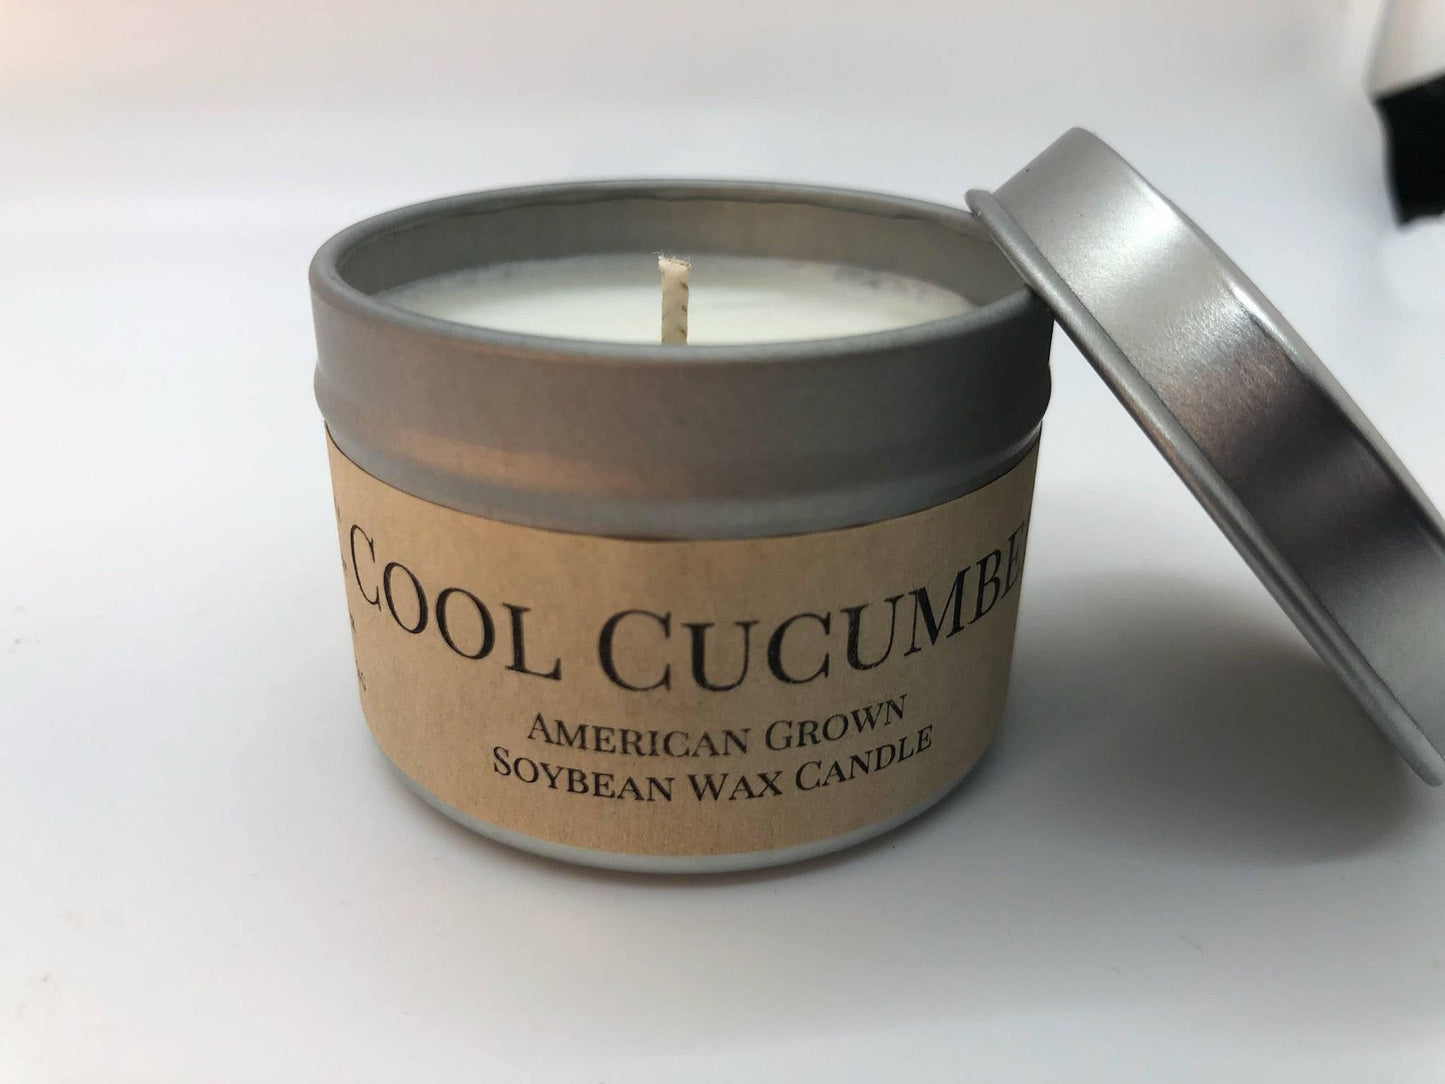 Cool Cucumber Soy Wax Candle | 2 oz Travel Tin - Prairie Fire Candles